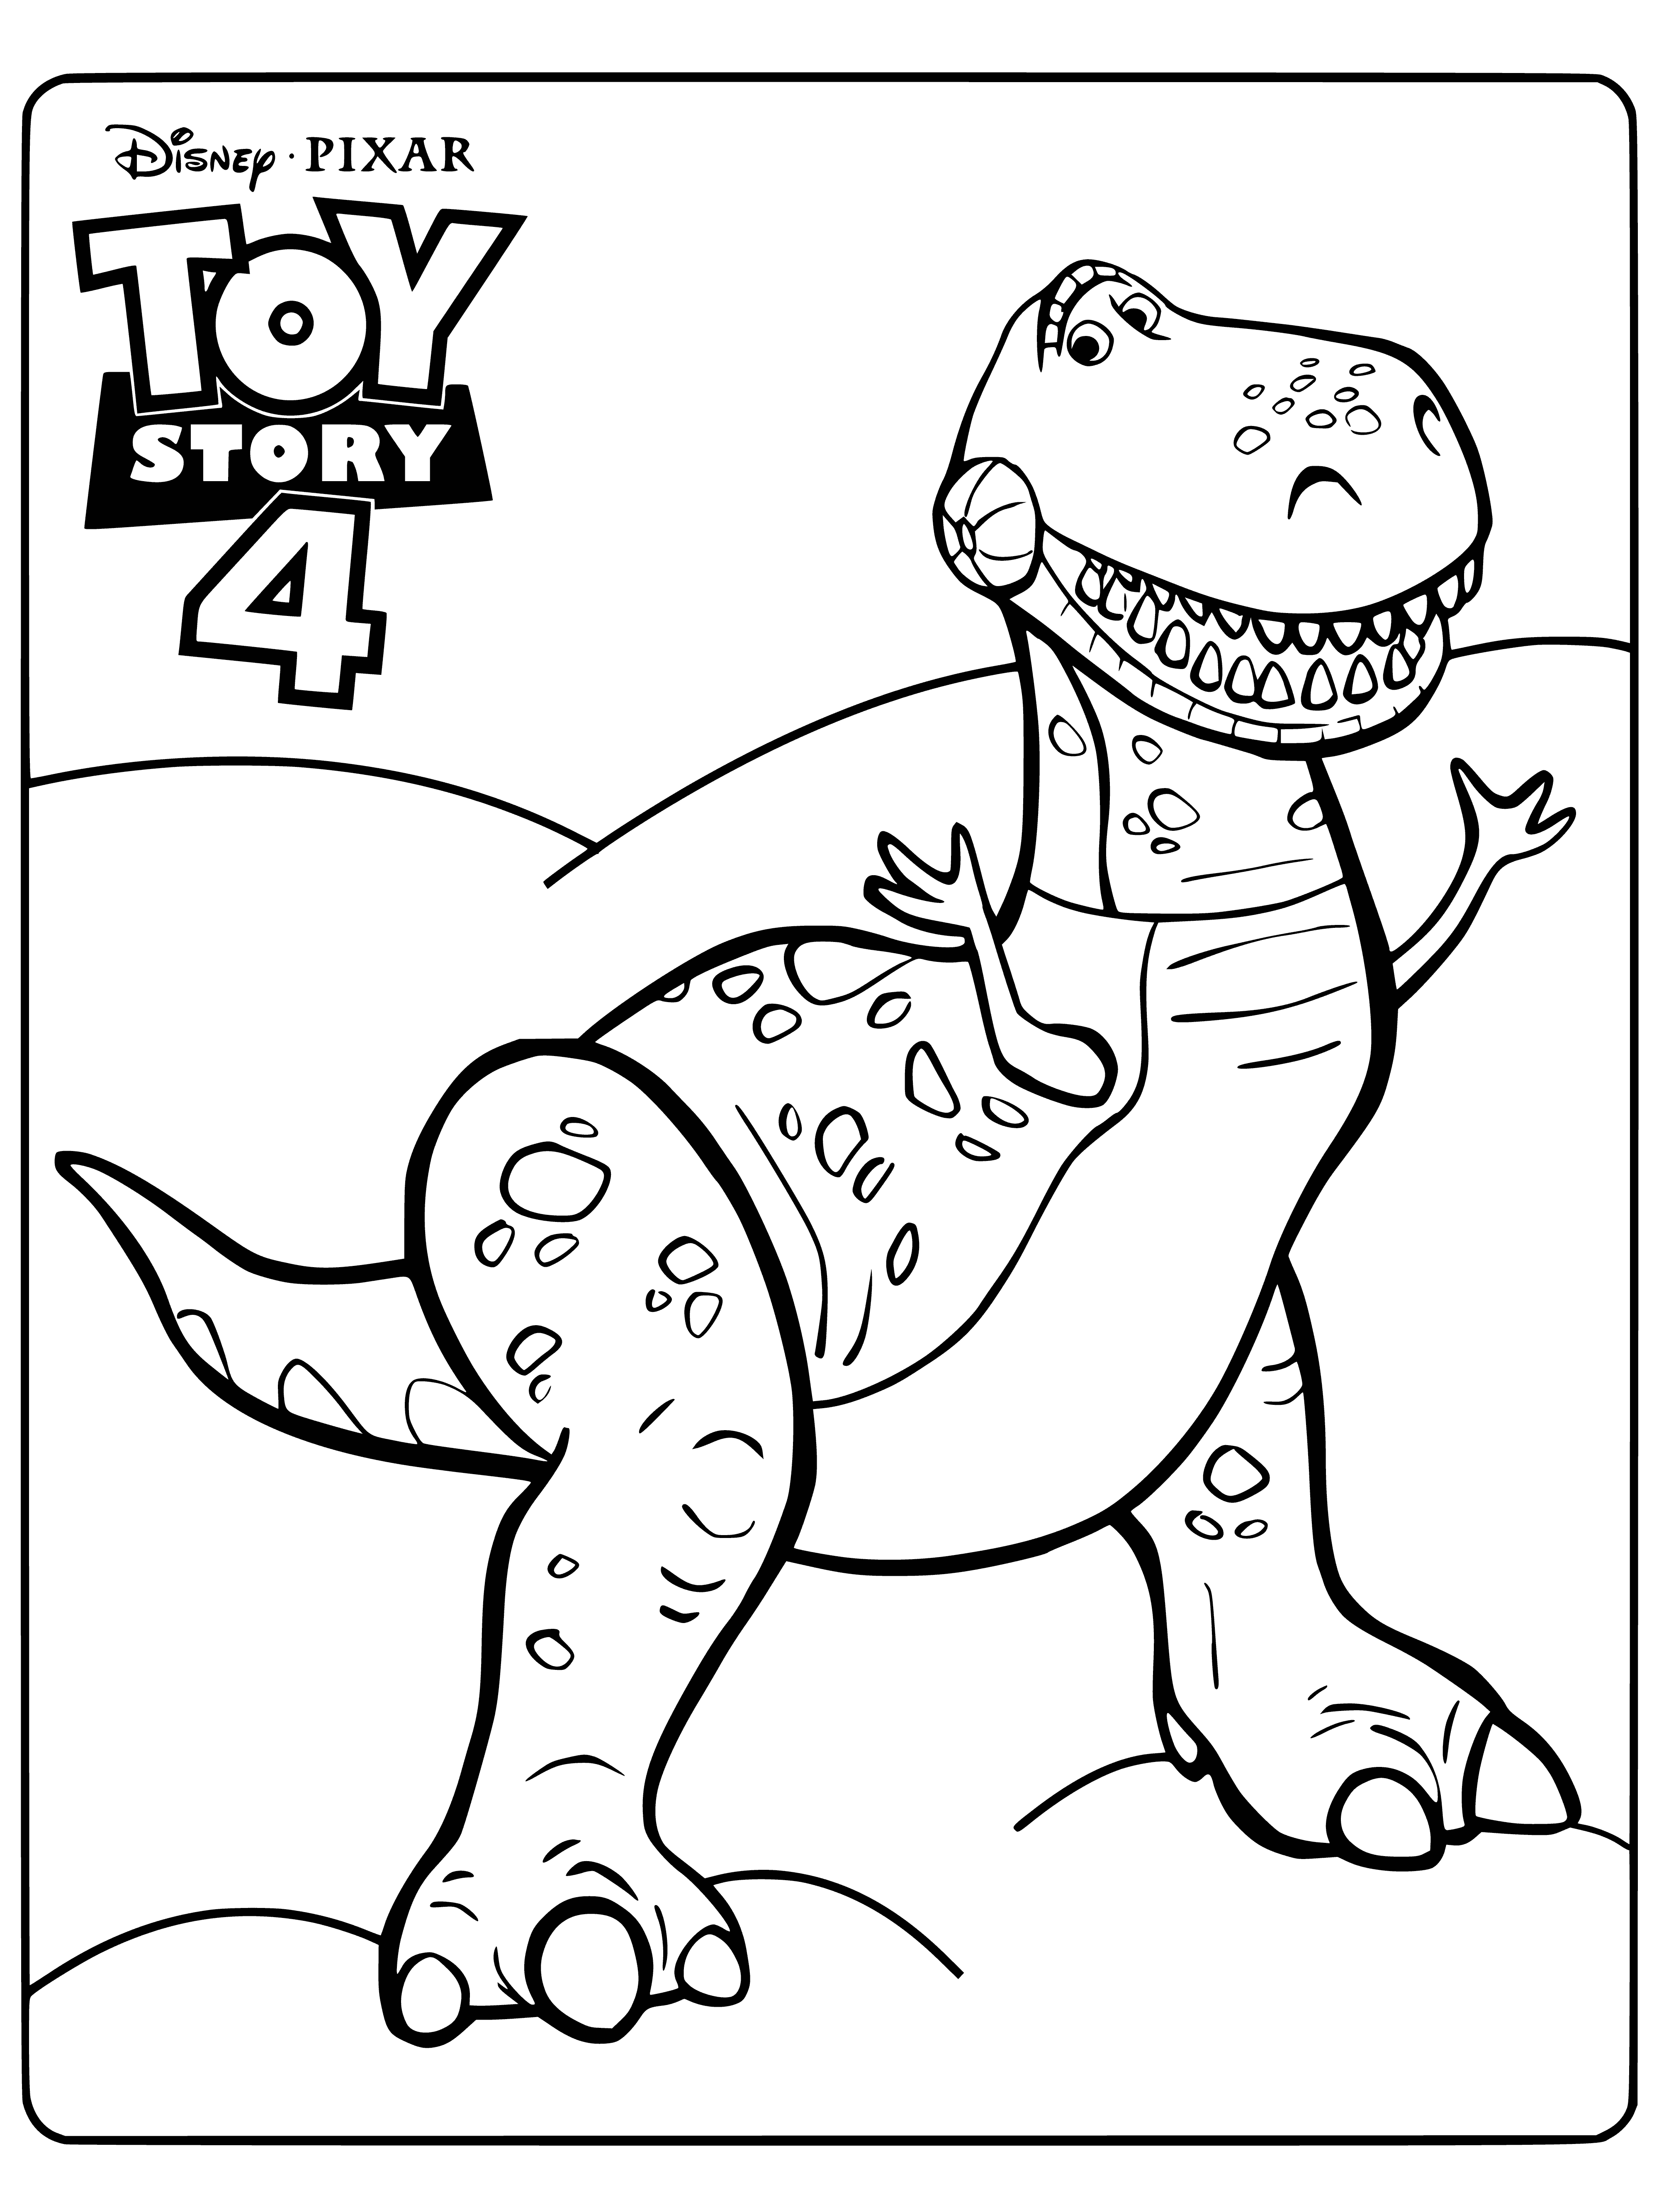 coloring page: A bright green dinosaur with white teeth, stubby arms & legs and a red collar with a gold tag that says "Rex".